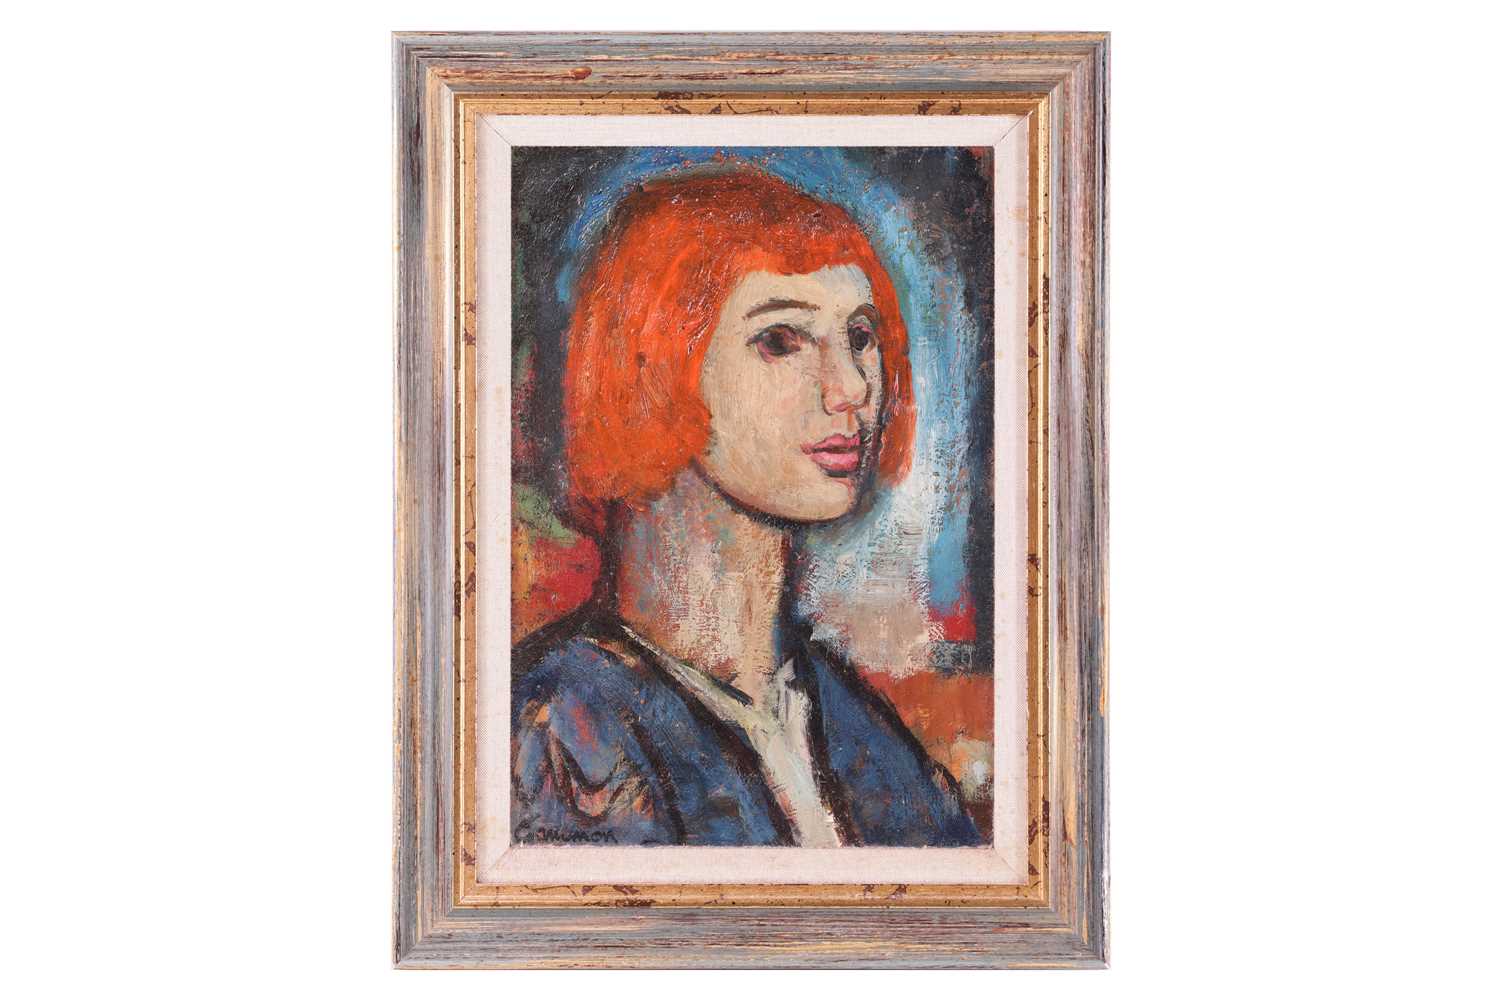 Reg Gammon (1894-1997), 'Girl with Red Hair', signed 'Gammon' (lower left), oil on board, 39 x 27 cm